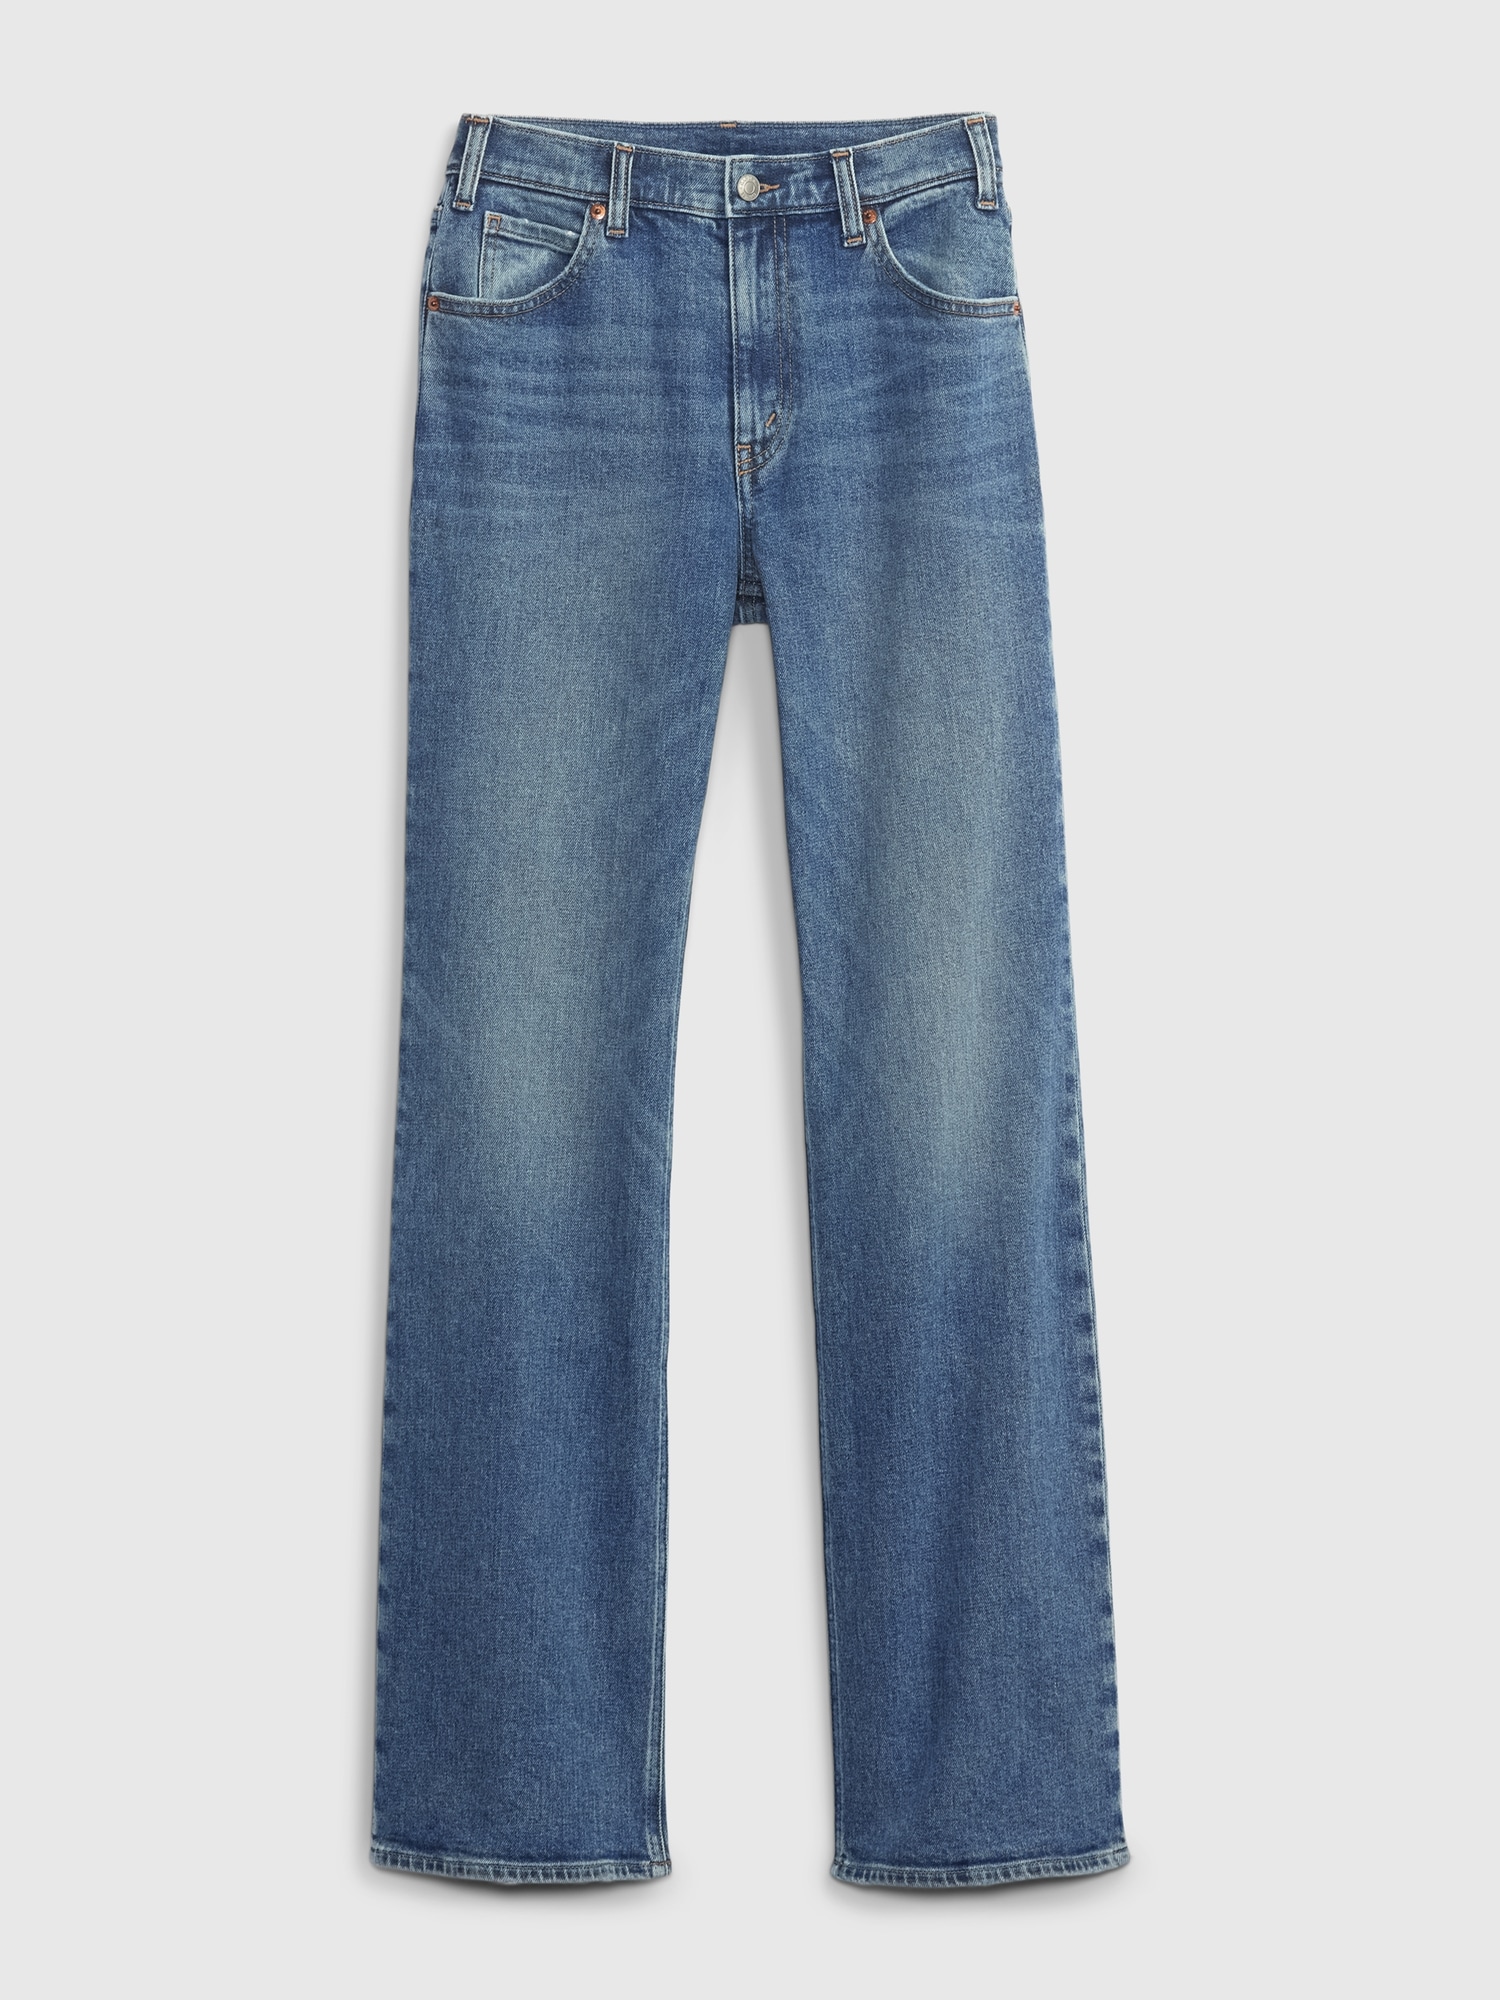 90's Vibe Flare Jeans